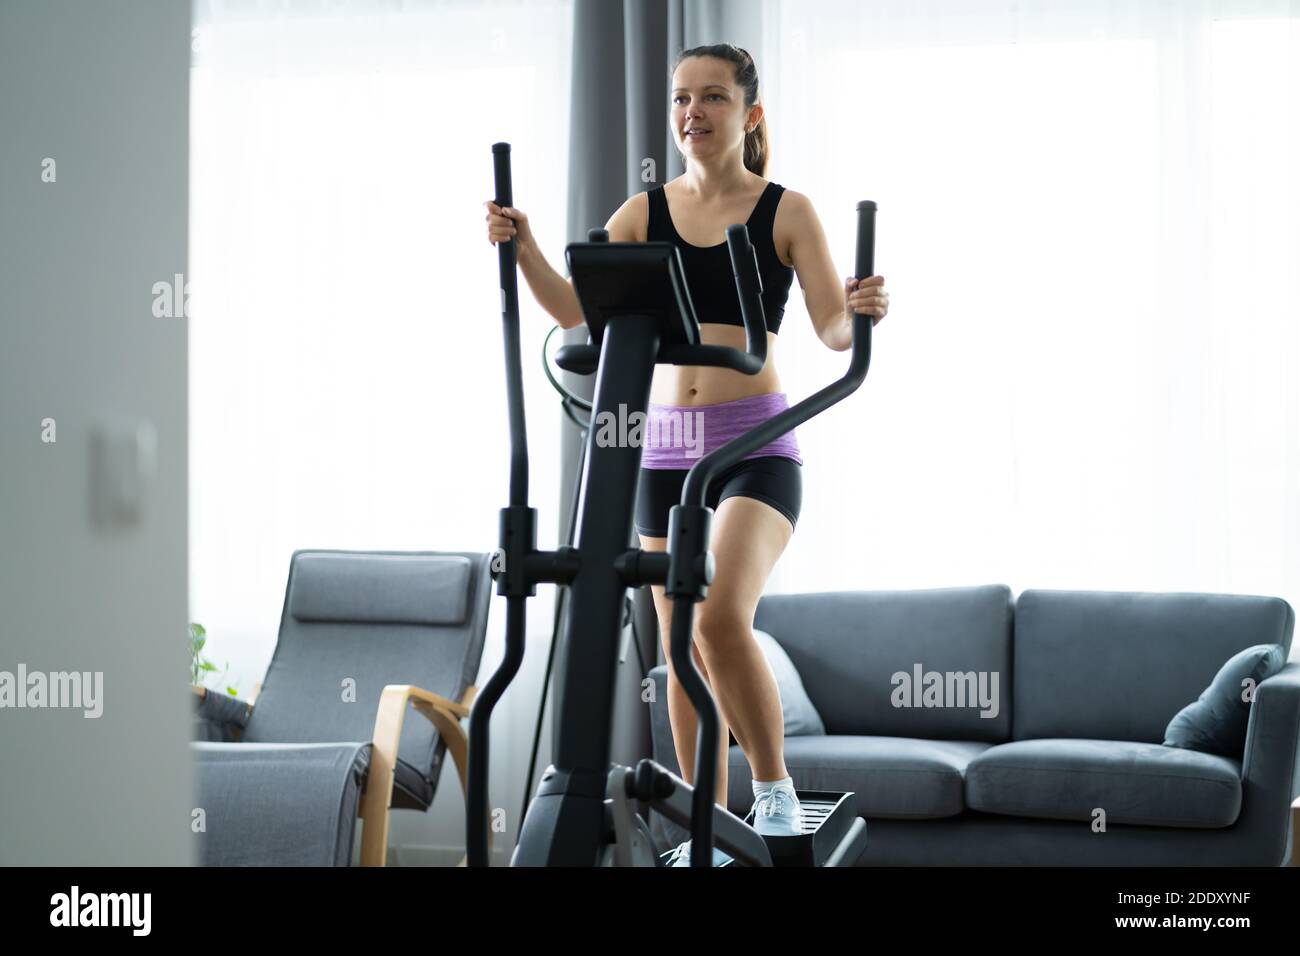 Woman Training On Elliptical Trainer At Home Stock Photo